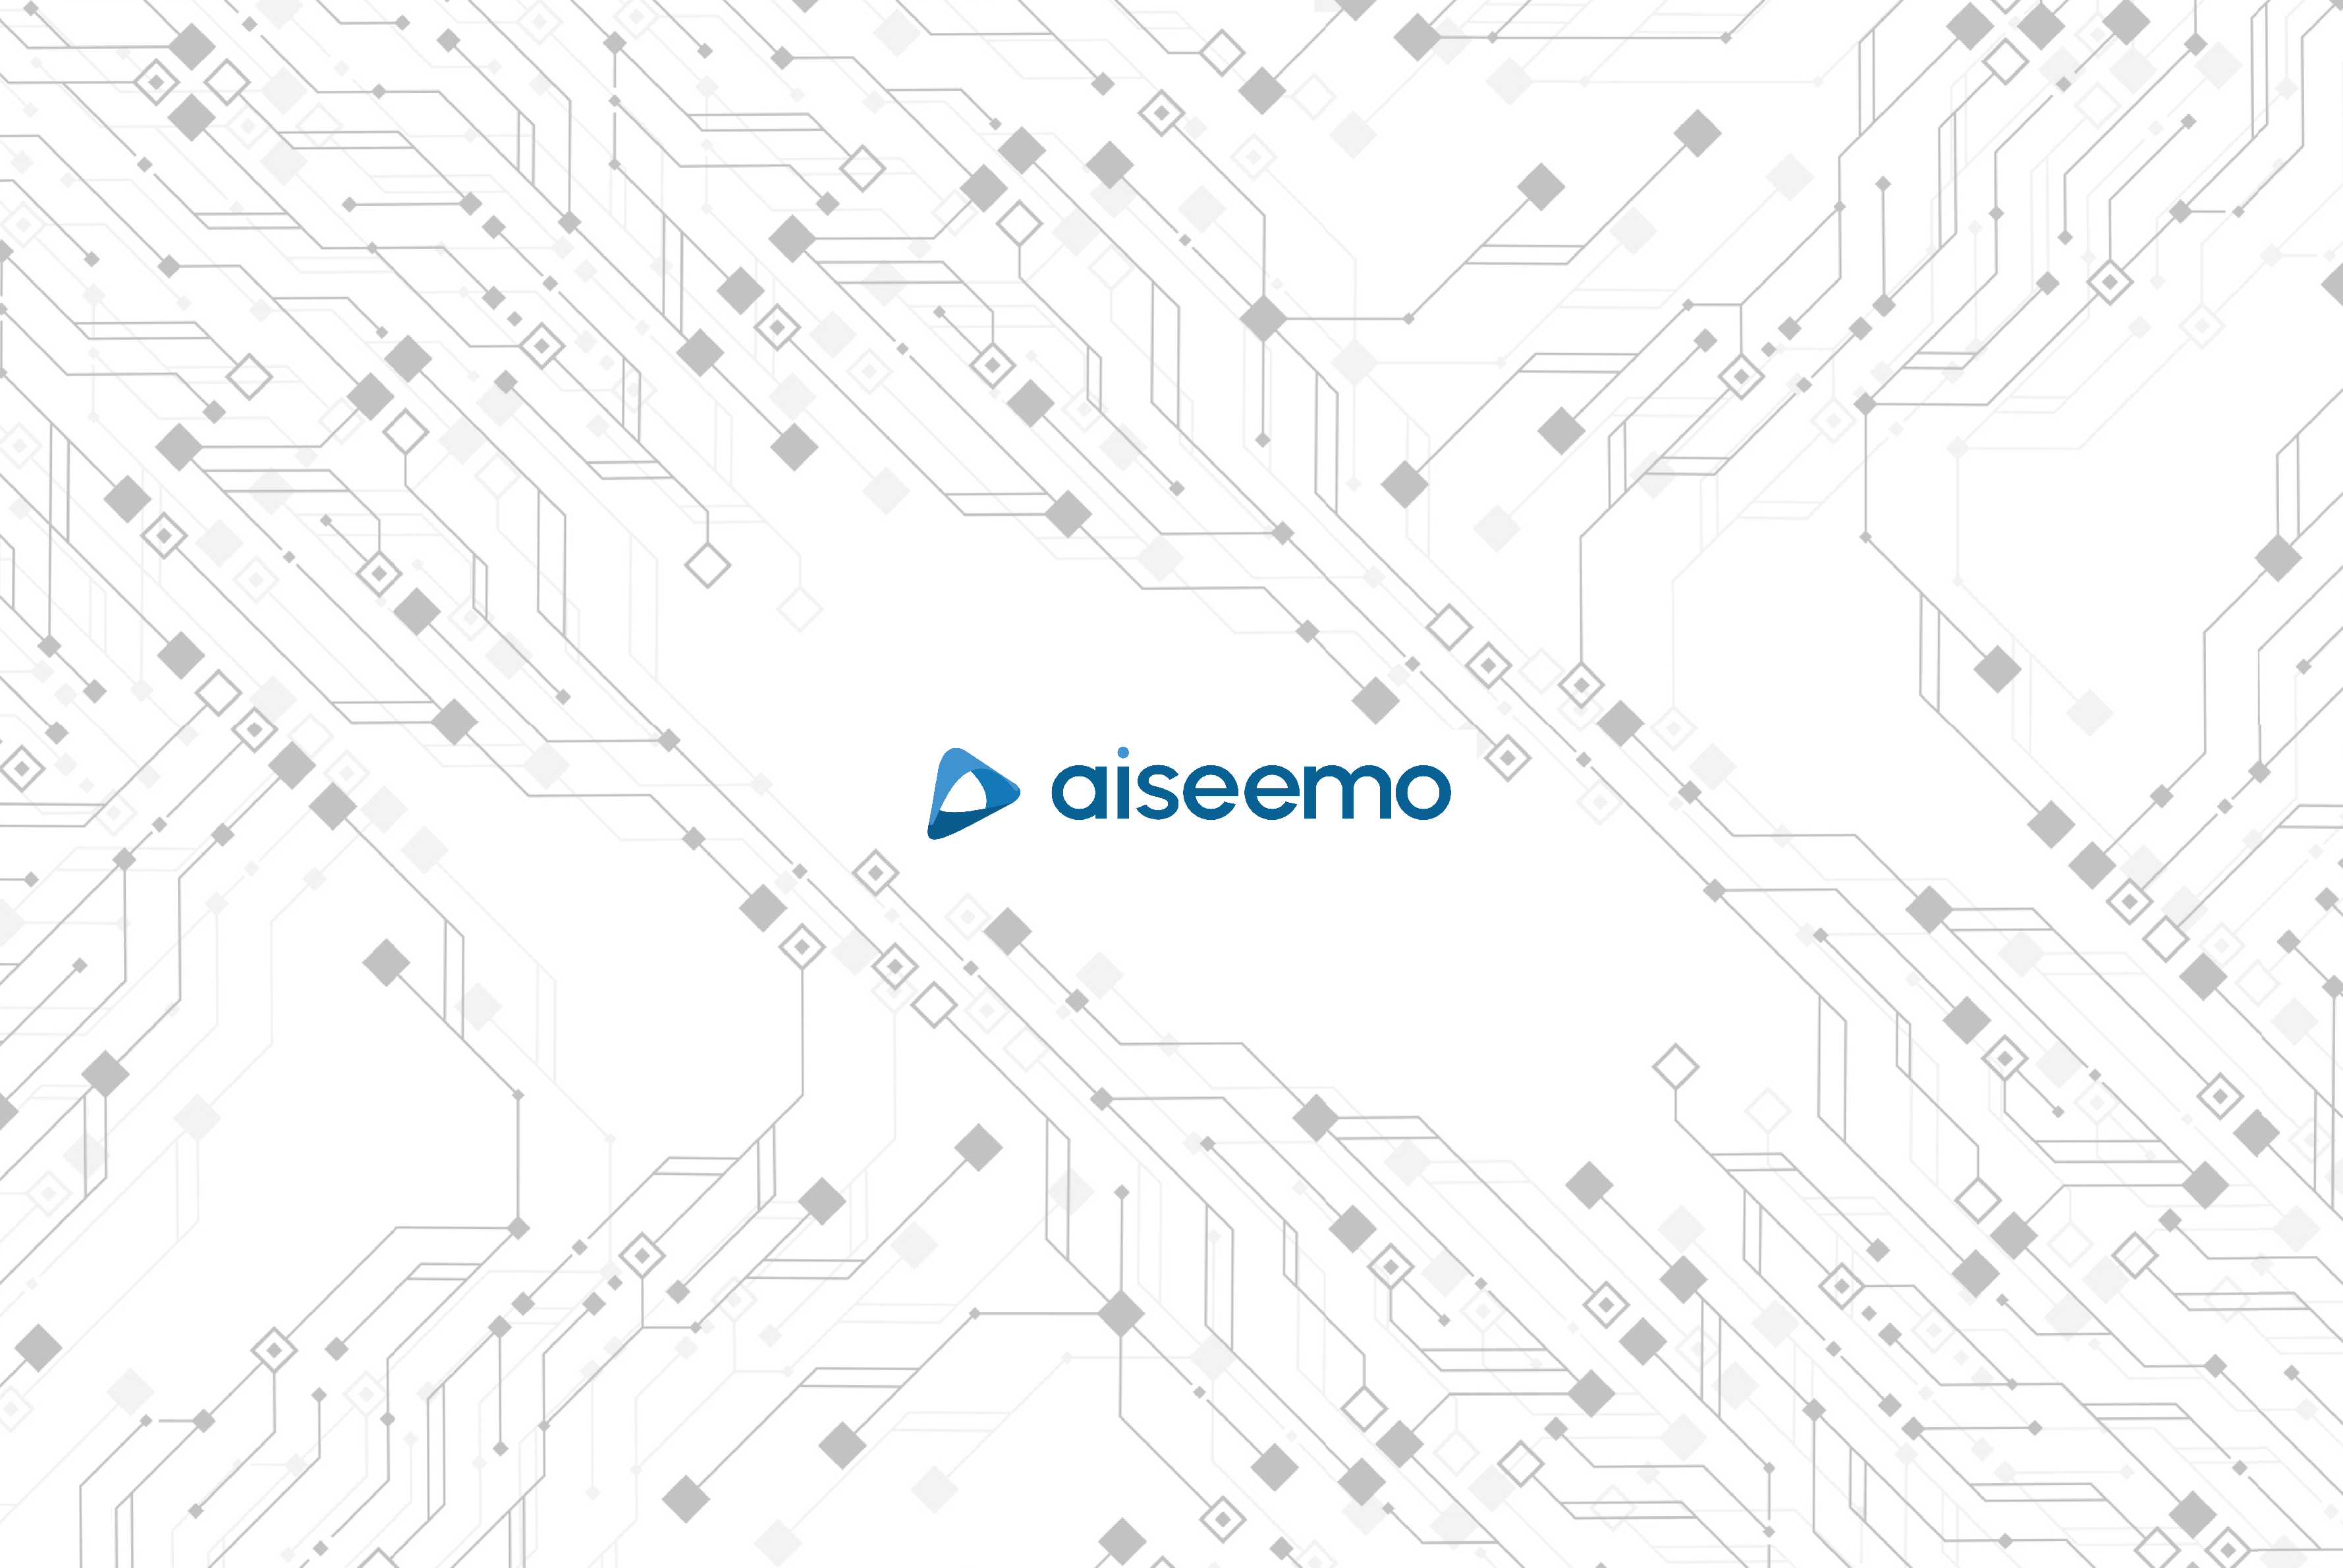 Founded in 2021 by a team of scientists from AGH University of Krakow, Aiseemo develops<br/>AI-based video analytics for real-time object and event detection.